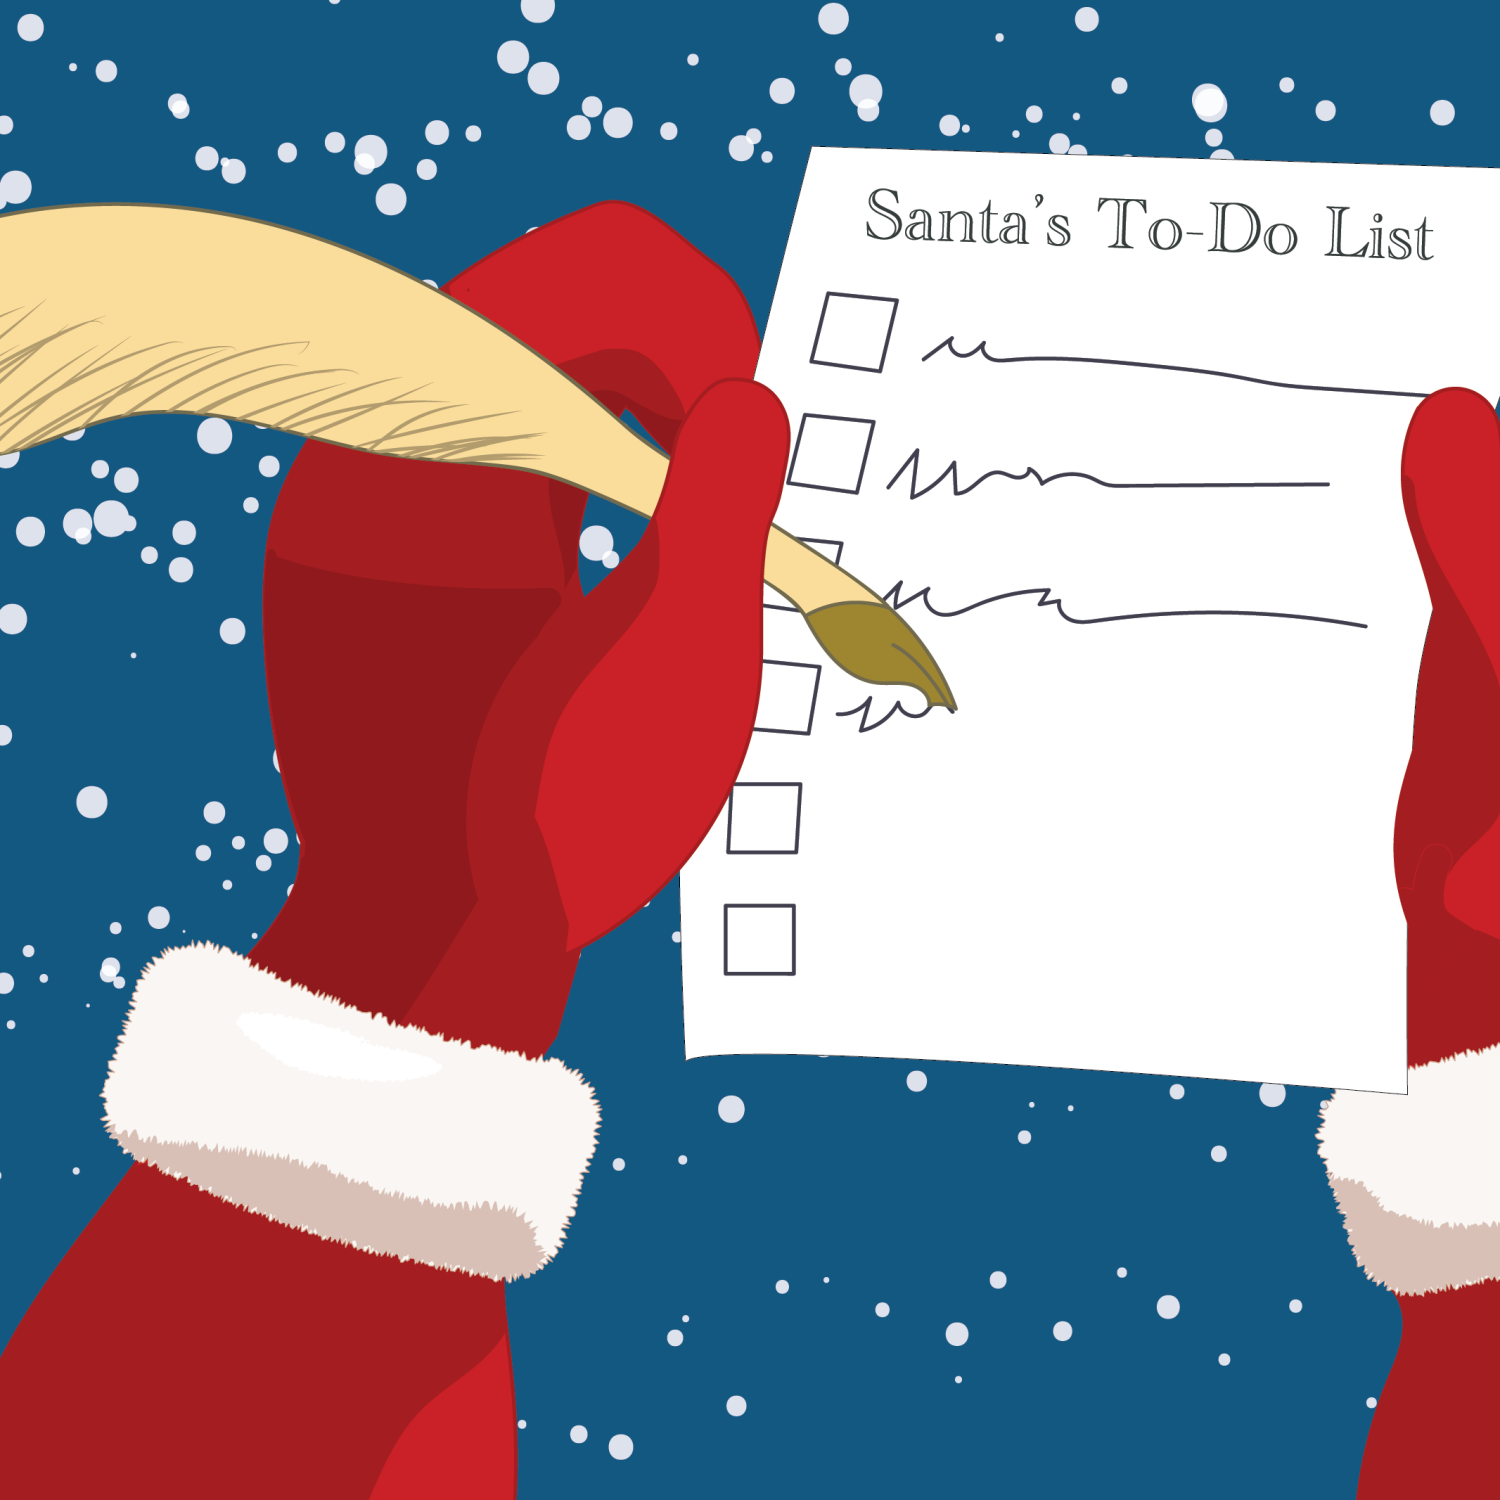 illustration of Santa holding a checklist with a feather pen and scribbling with “Santa's To-Do List” at the top